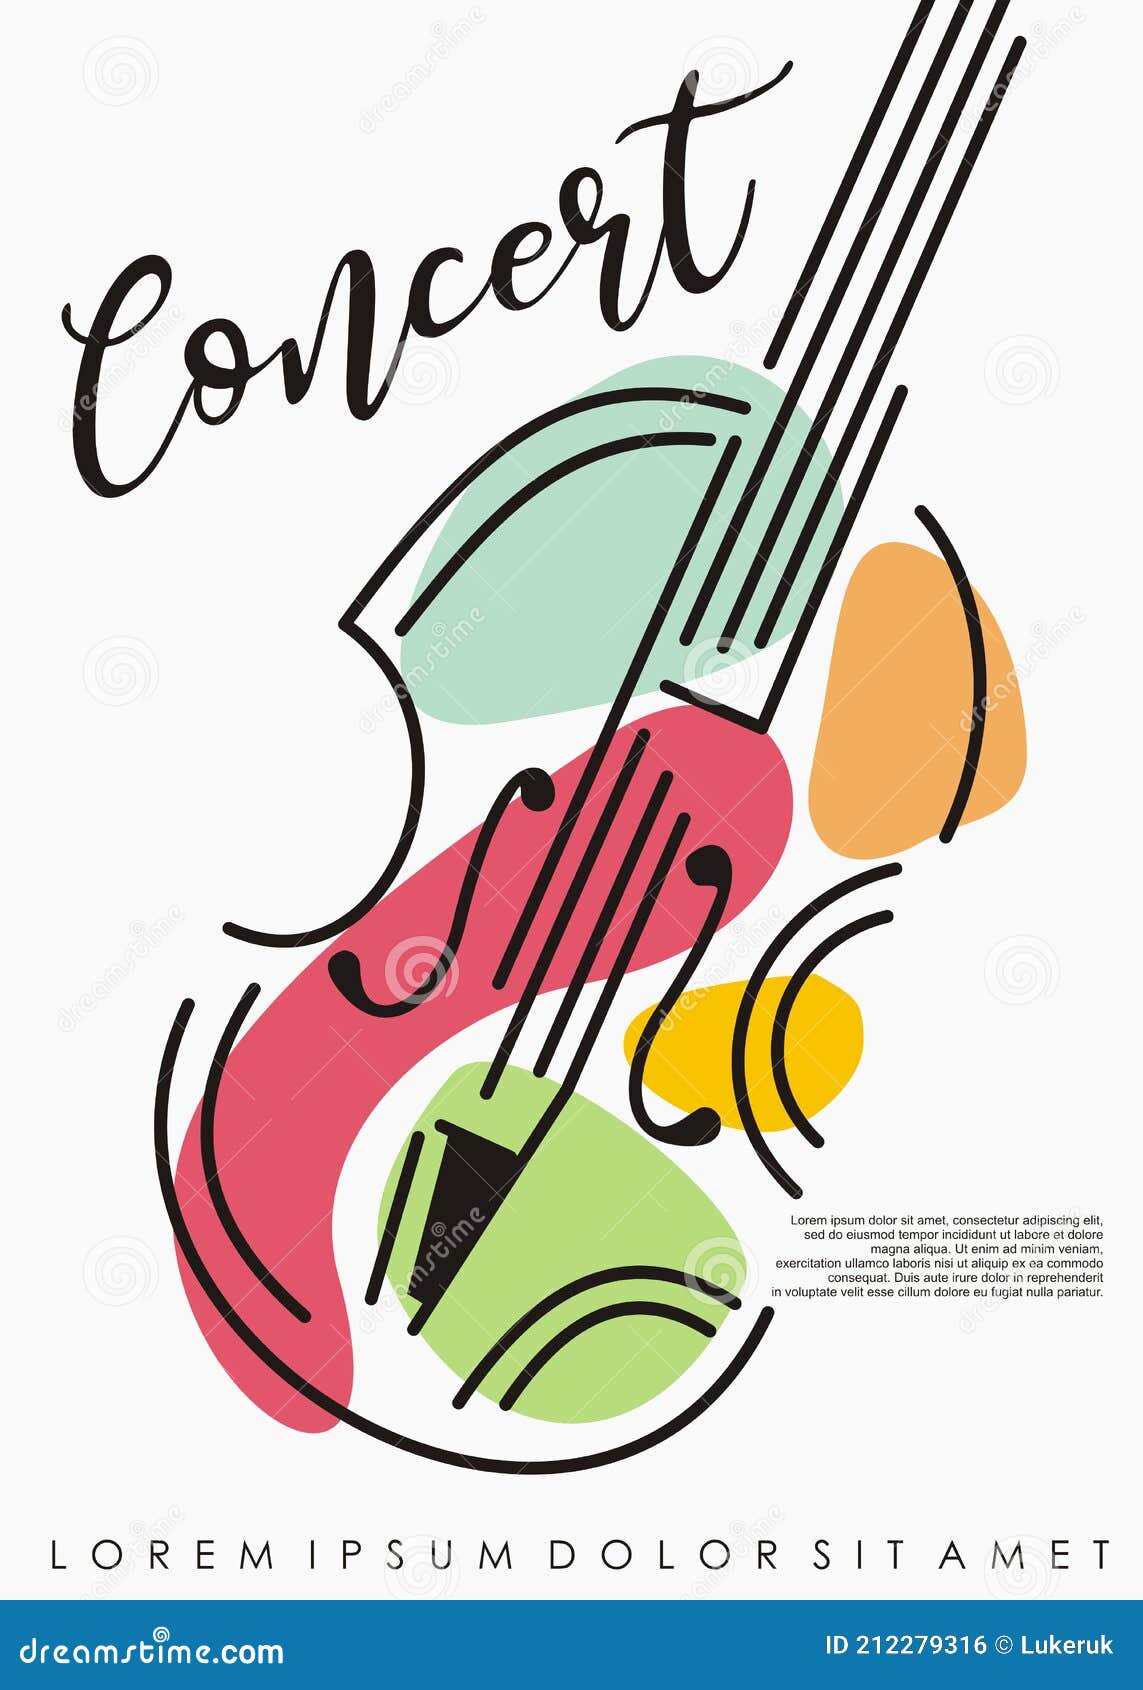 violin classical music concert poster